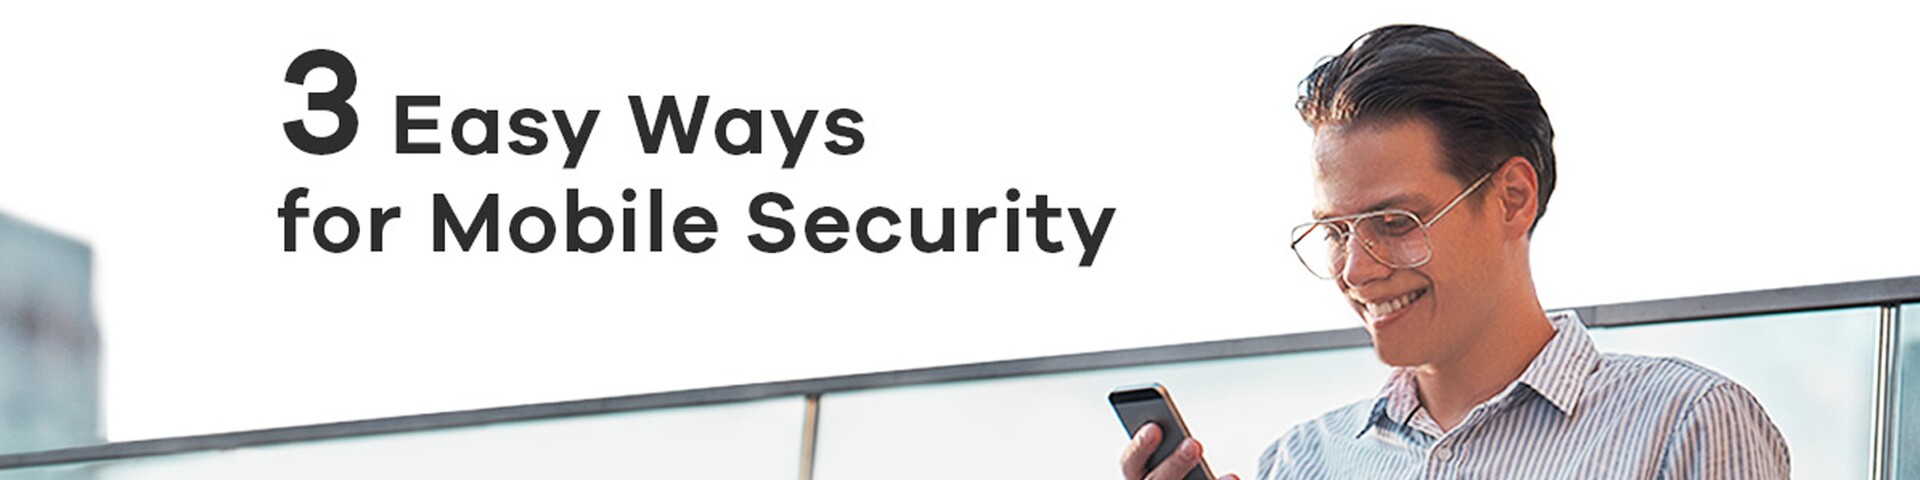 Is a hacker tracking you? 3 must-know steps for mobile security